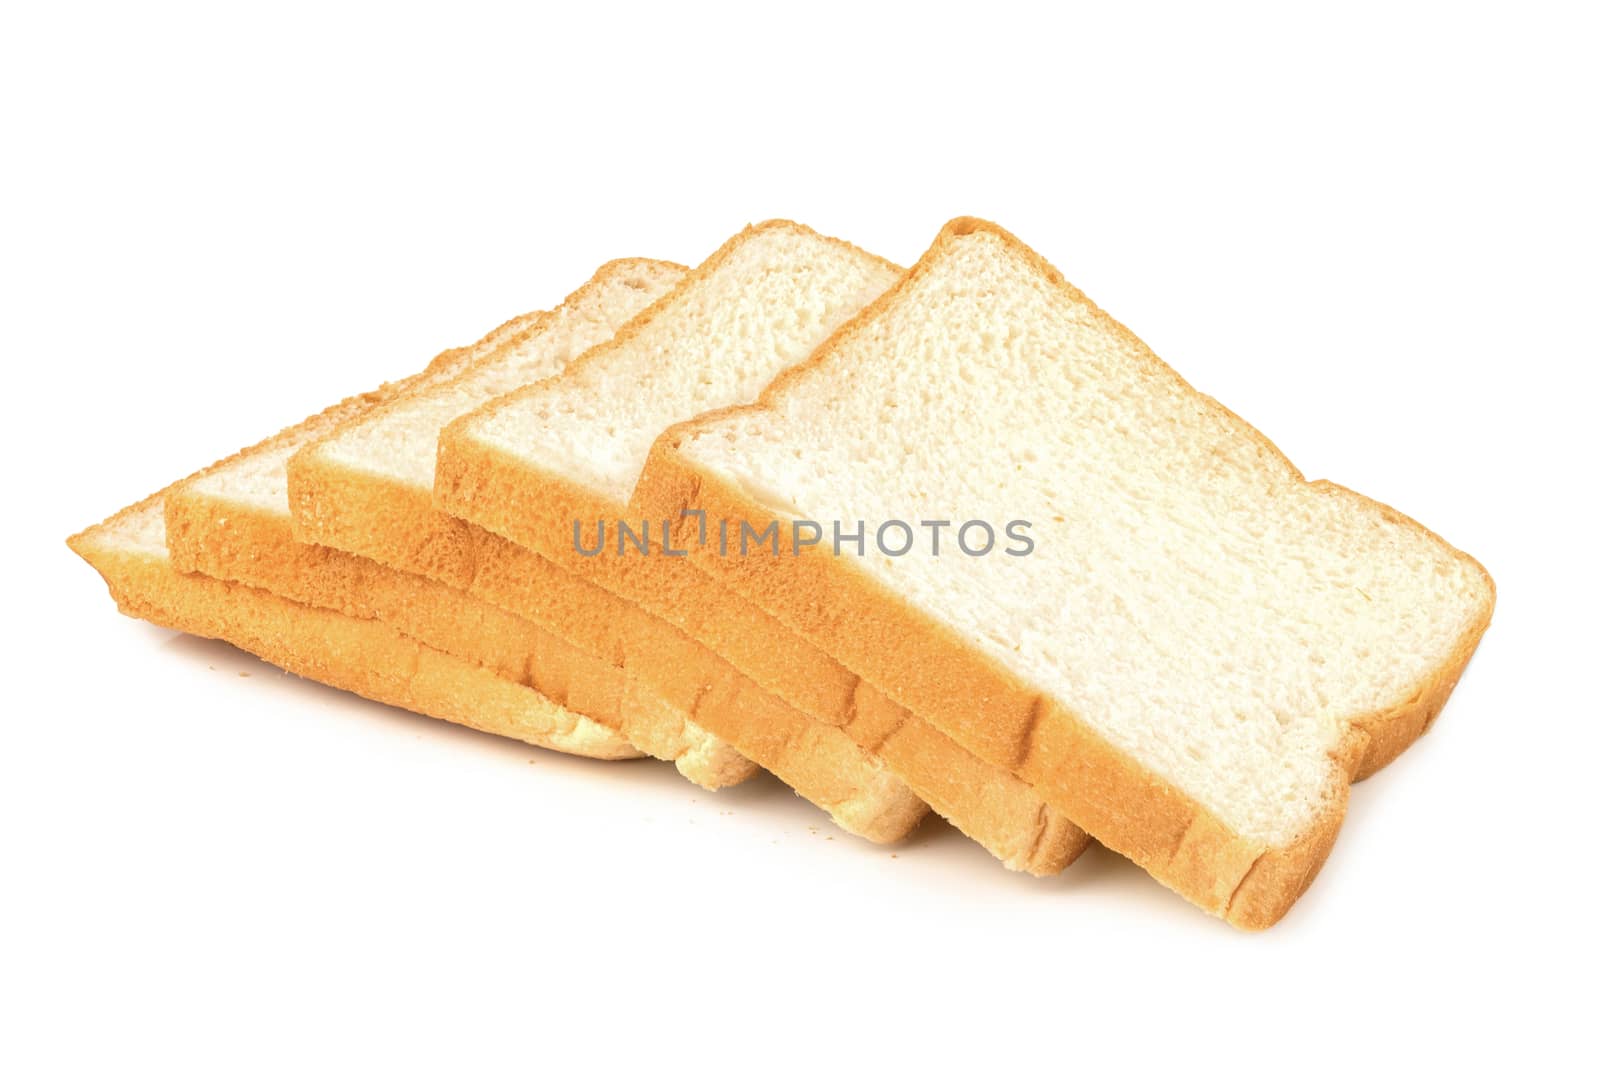 Slice of bread isolated on white background